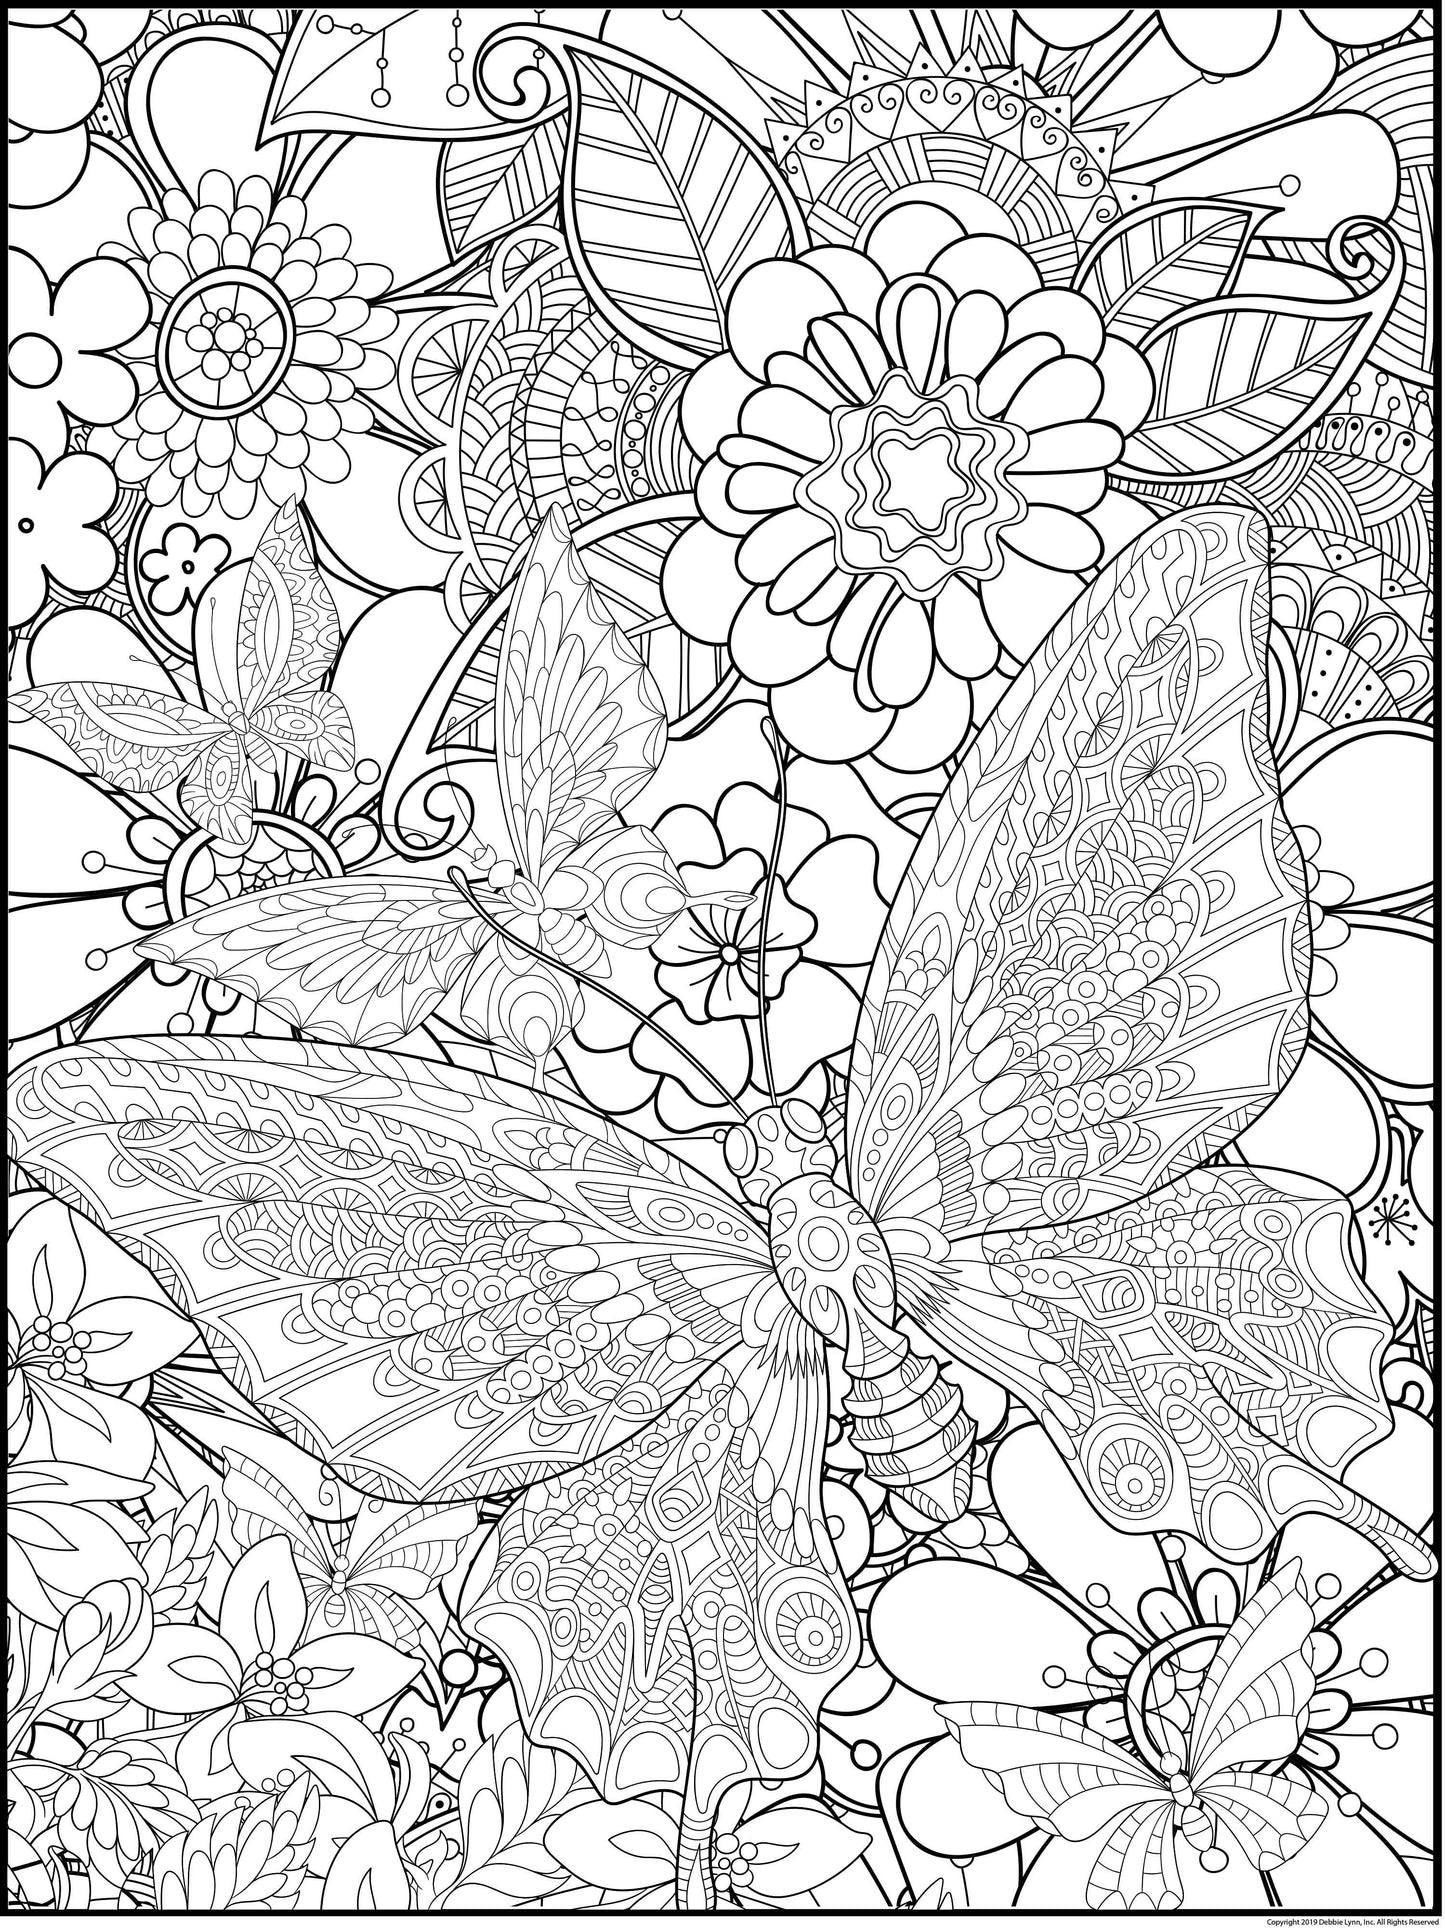 Butterfly Personalized Giant Coloring Poster 46"x60"